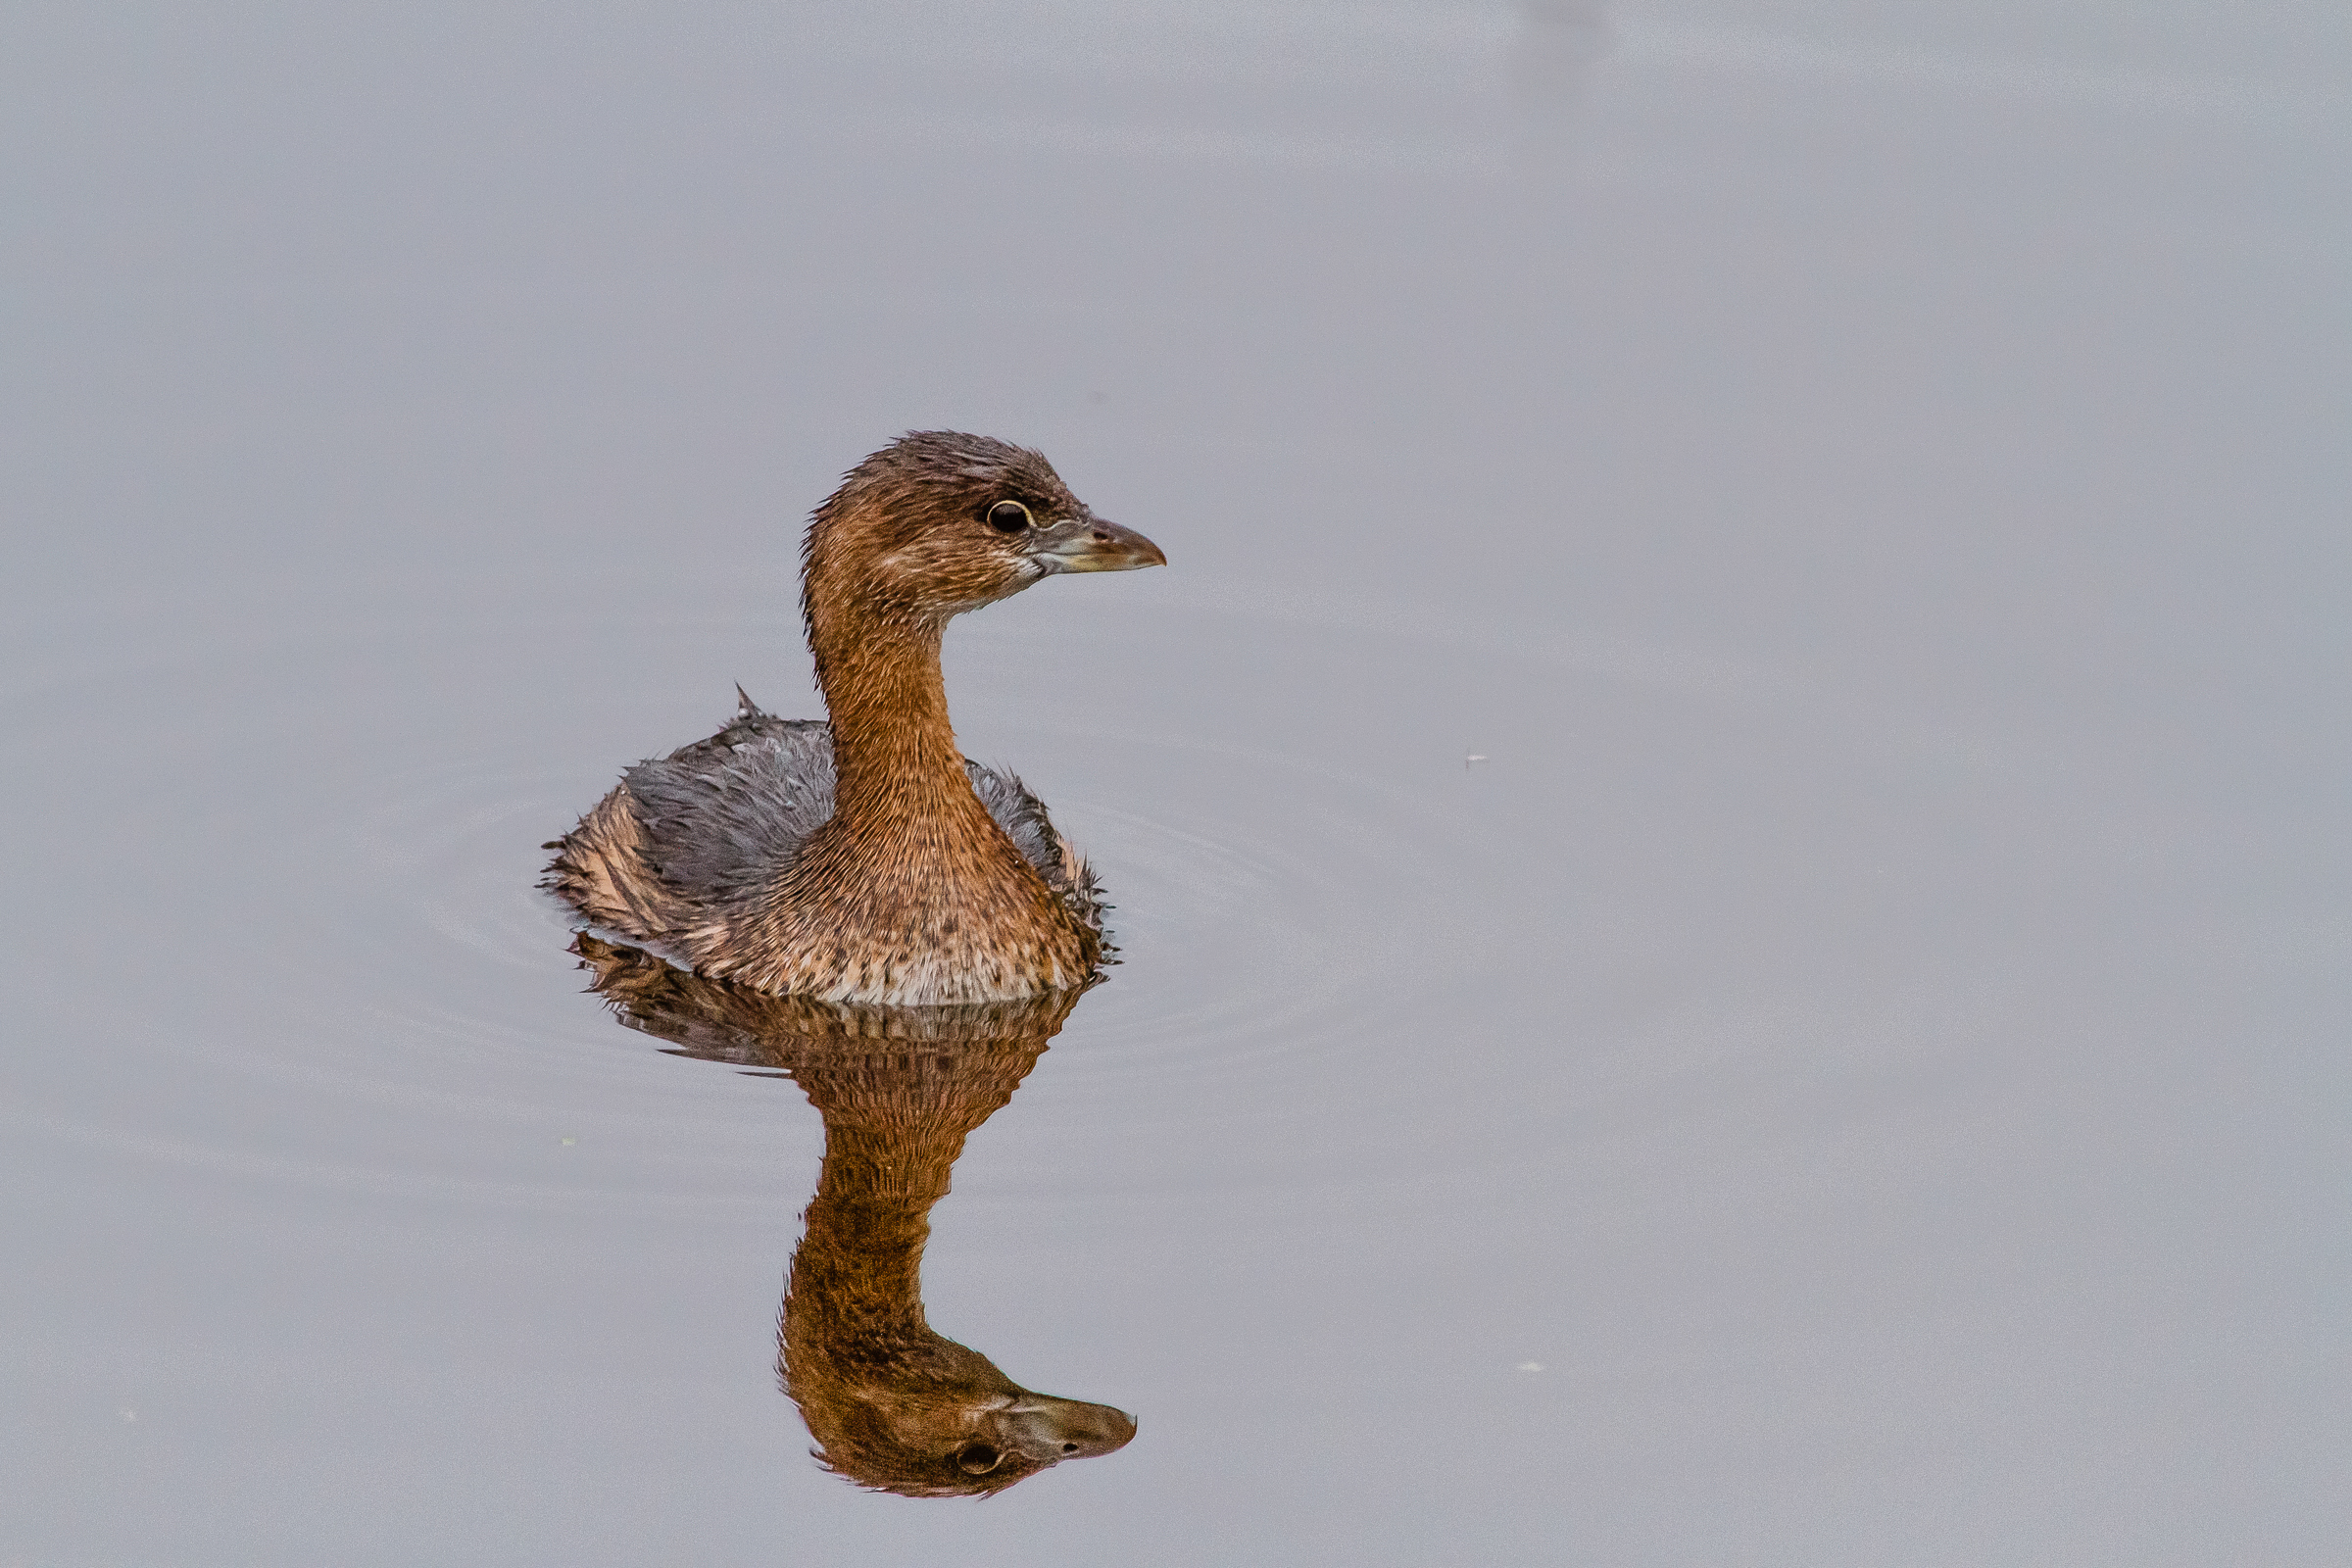 Pied-billed Grebe swimming in calm water, with a reflection.